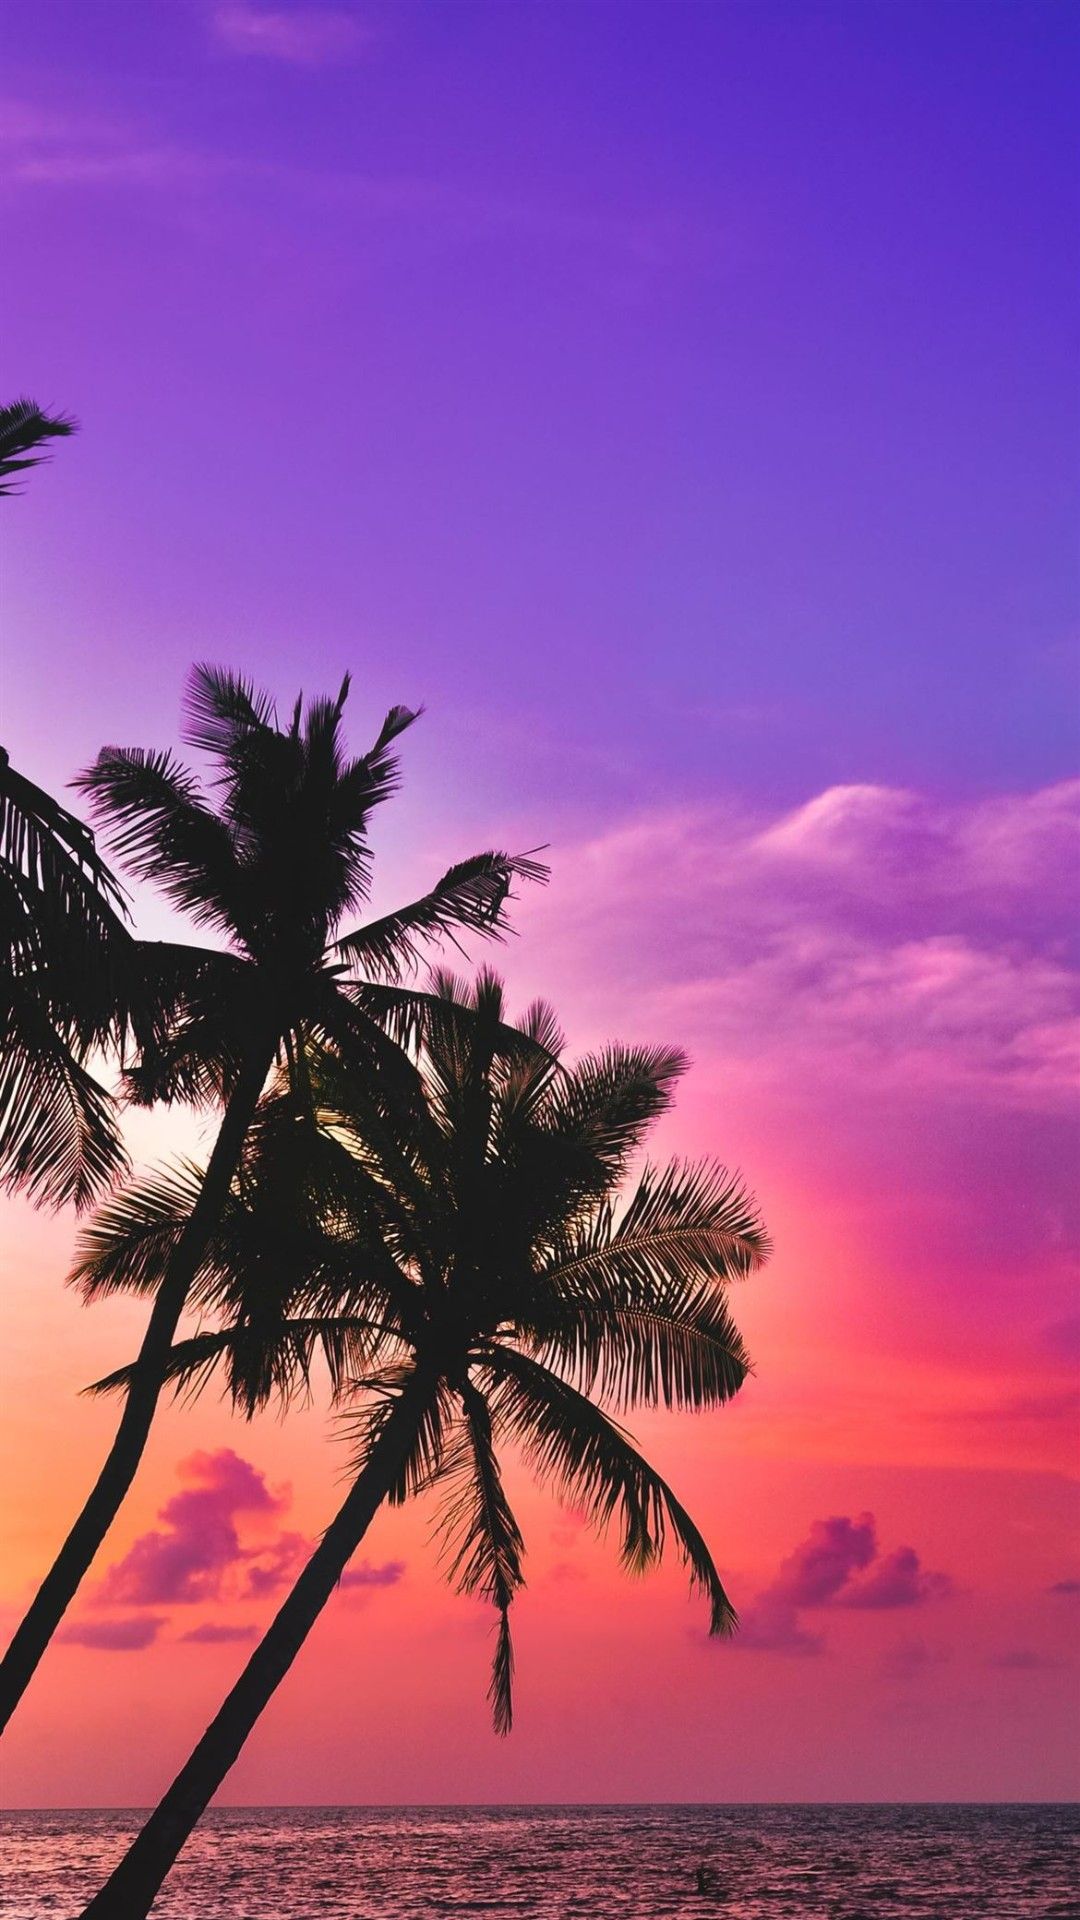 IPhone wallpaper of palm trees in front of a sunset - Summer, beach